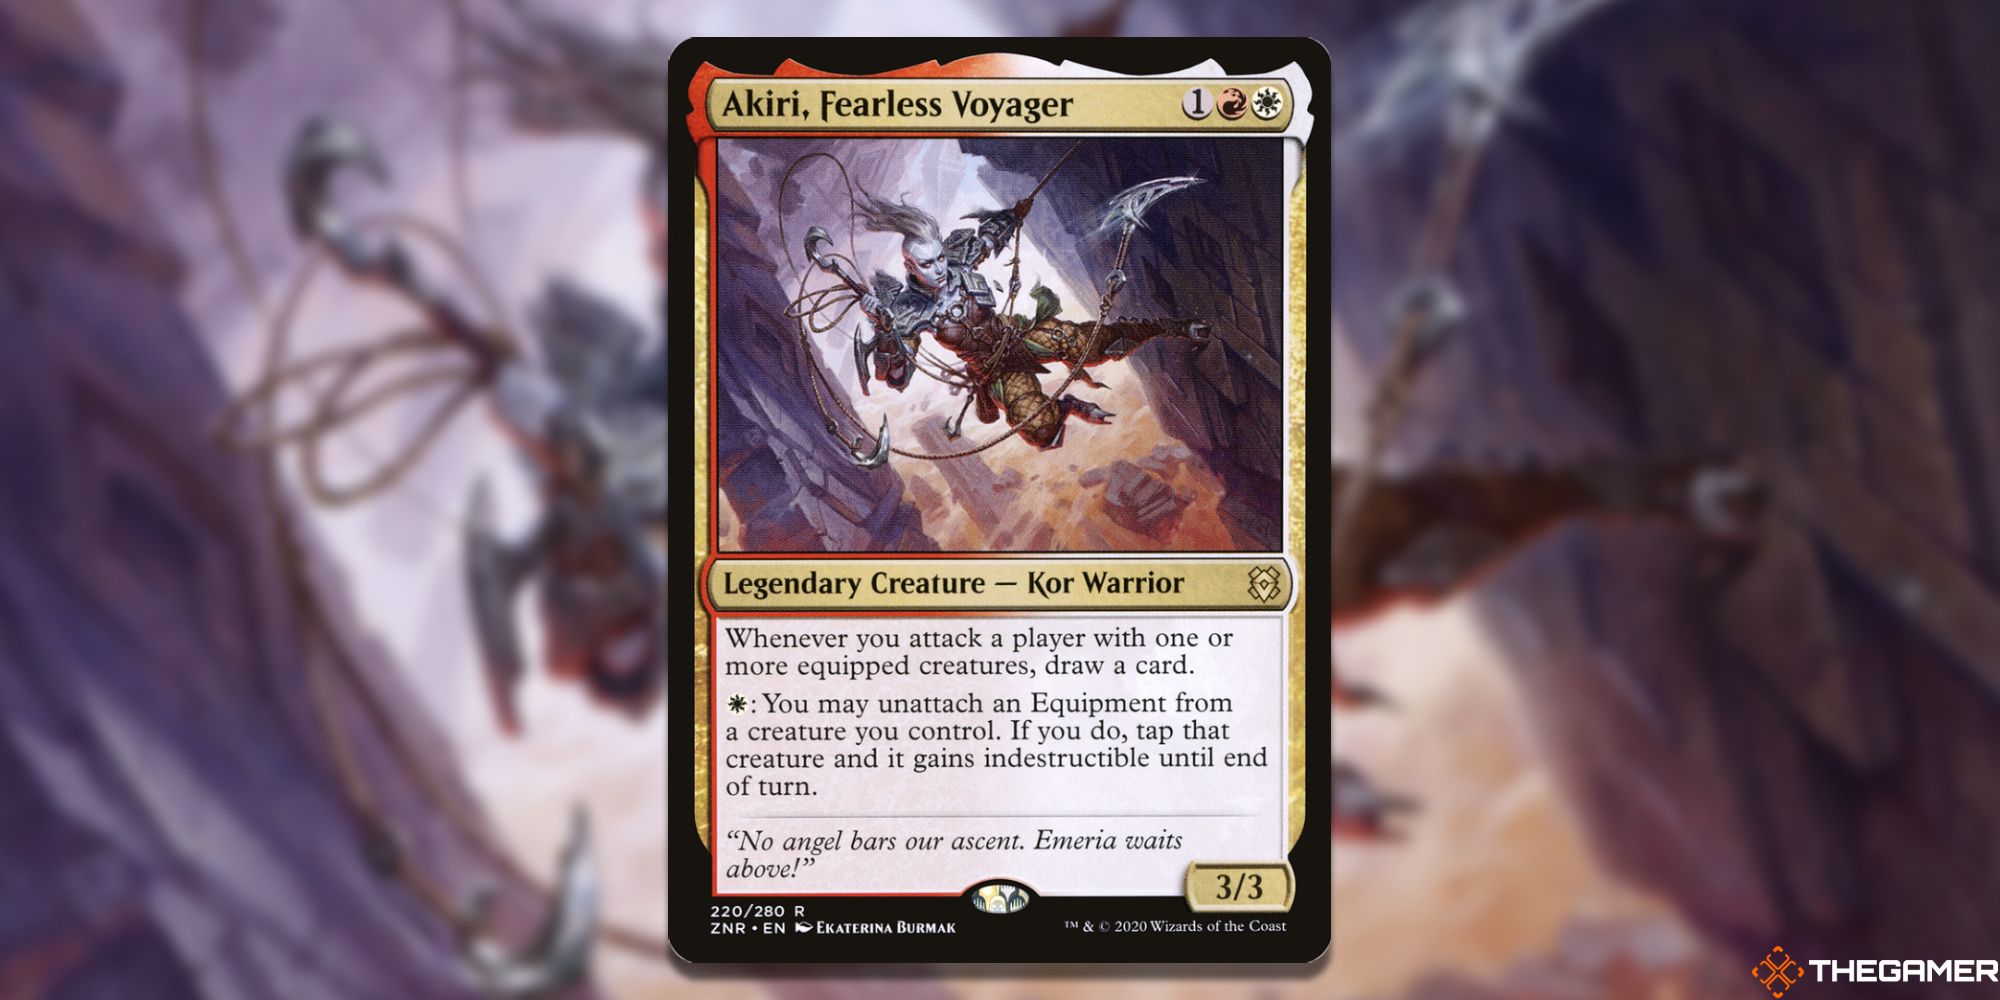 Image of the Akiri, Fearless Voyger card in Magic: The Gathering, with art by Ekaterina Burmak